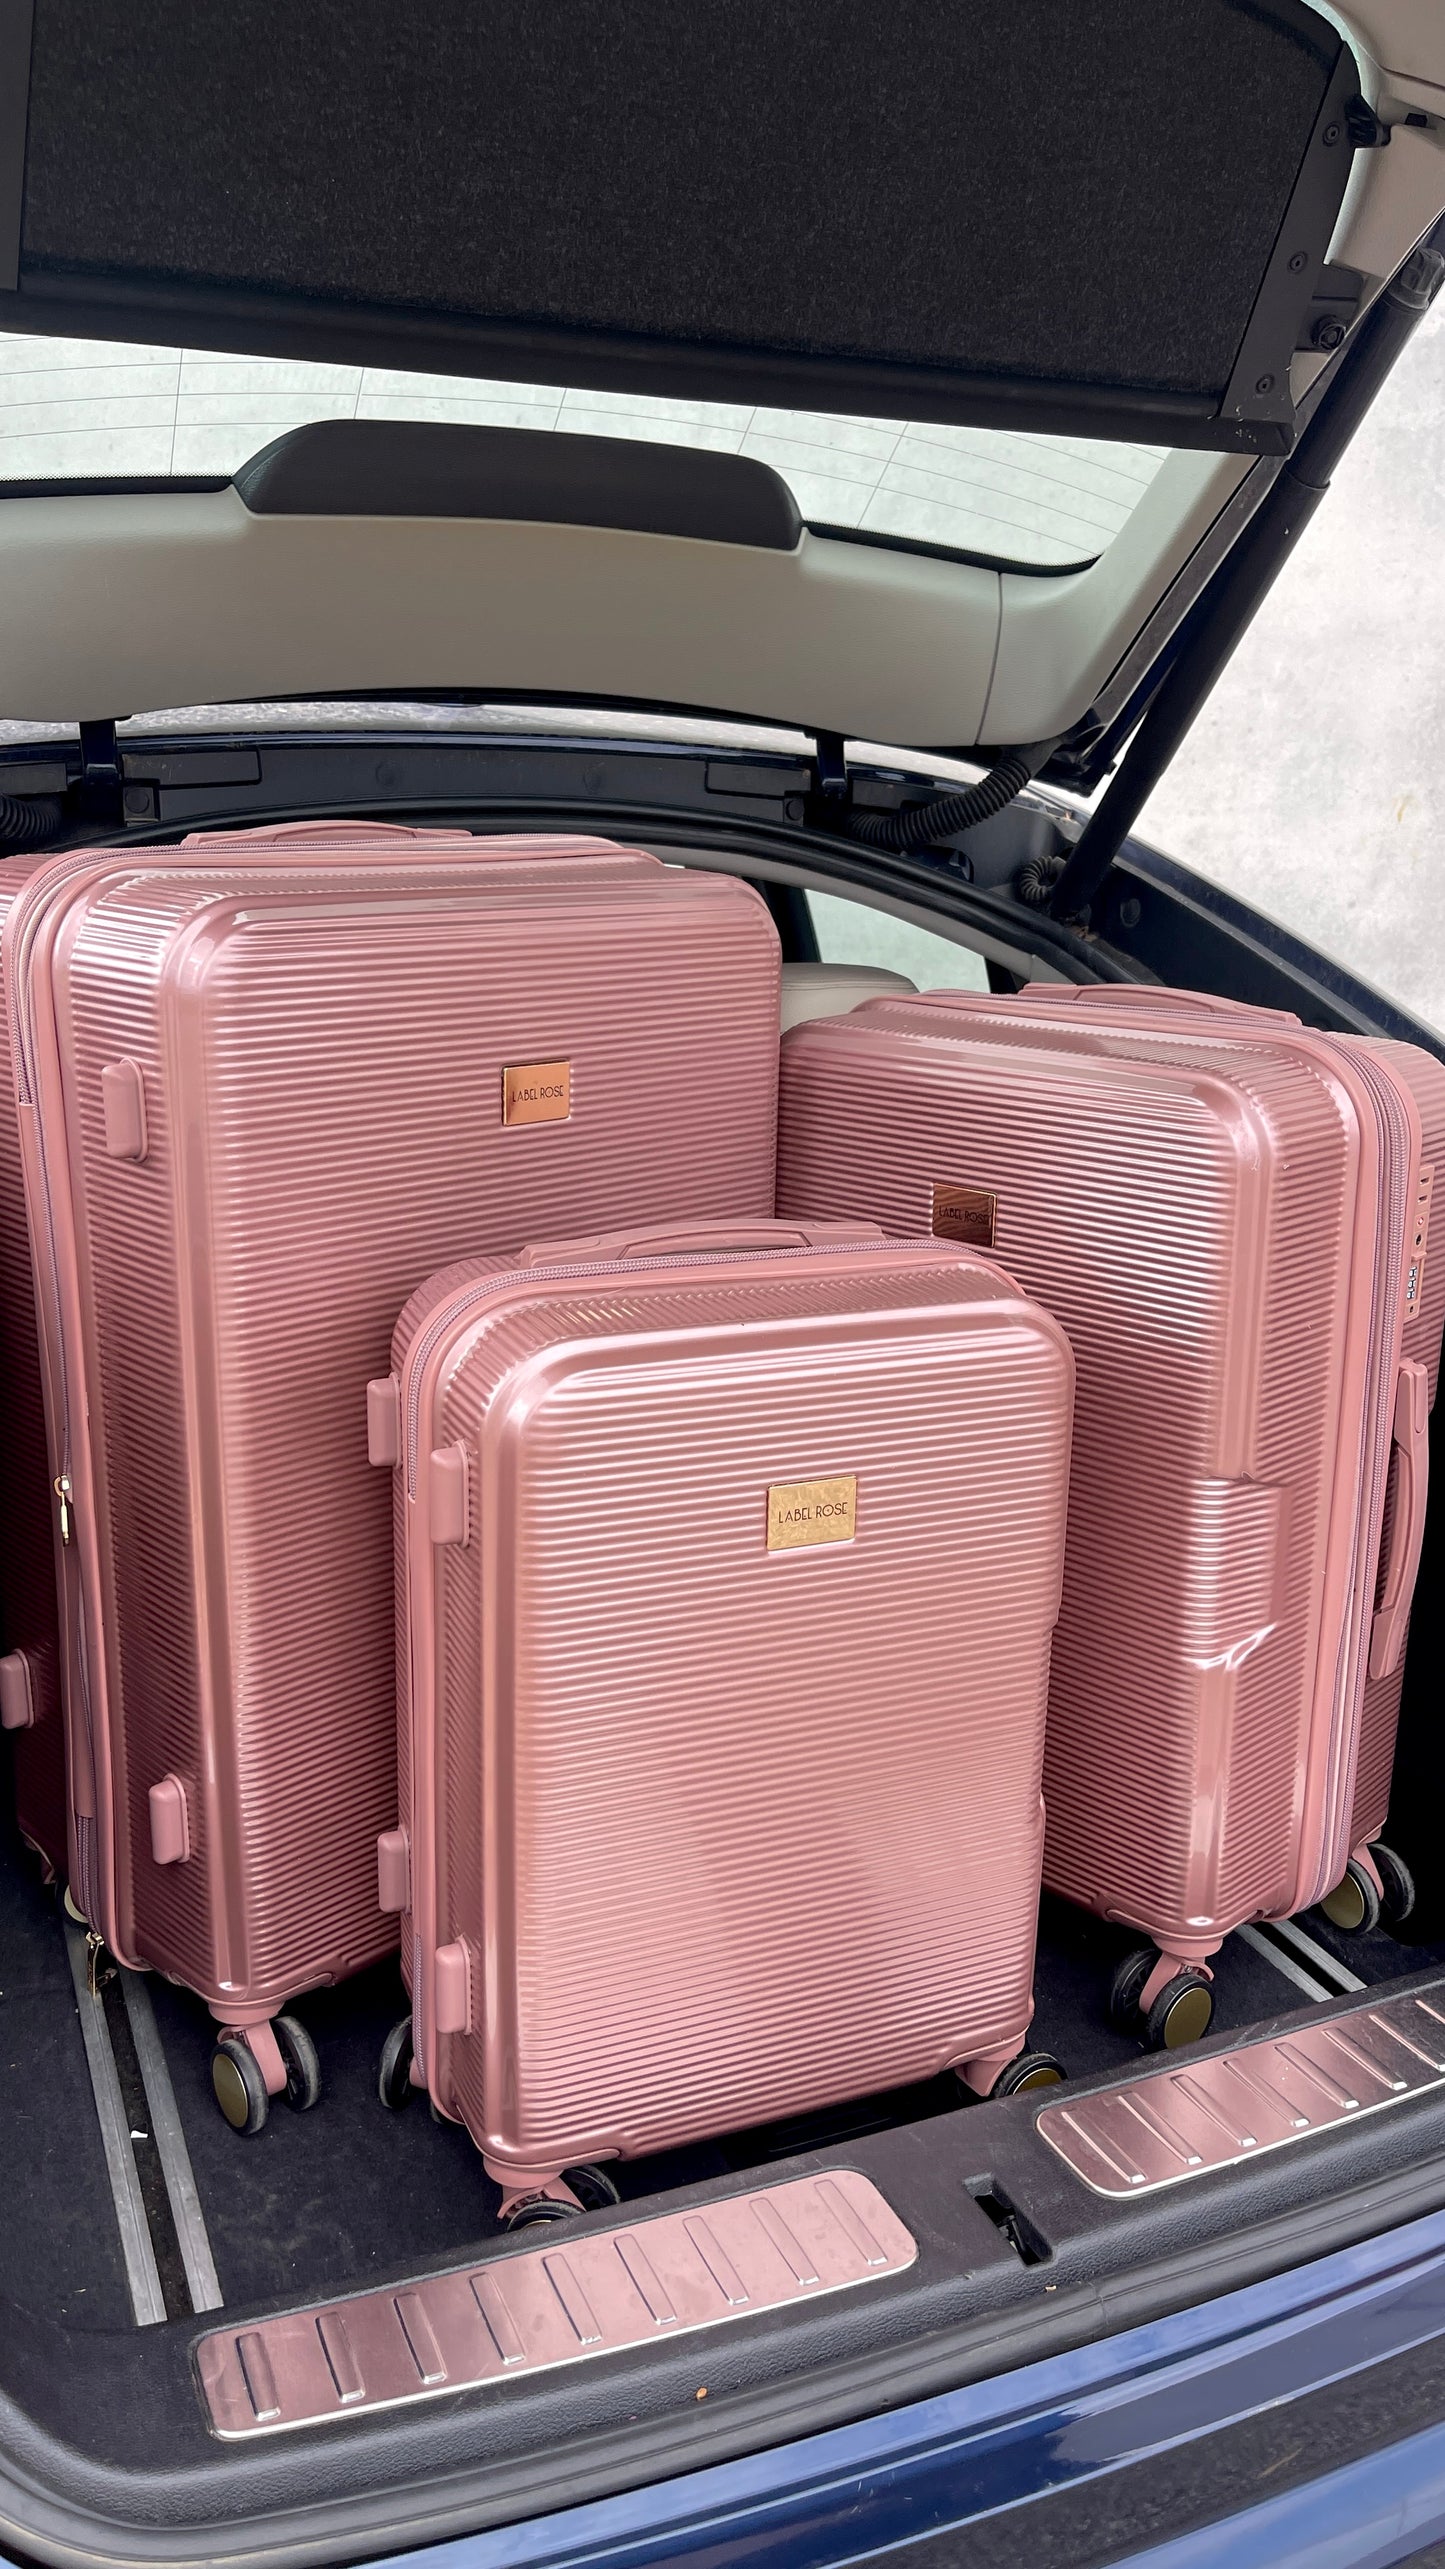 Shiny trolley suitcase four wheels - PINK